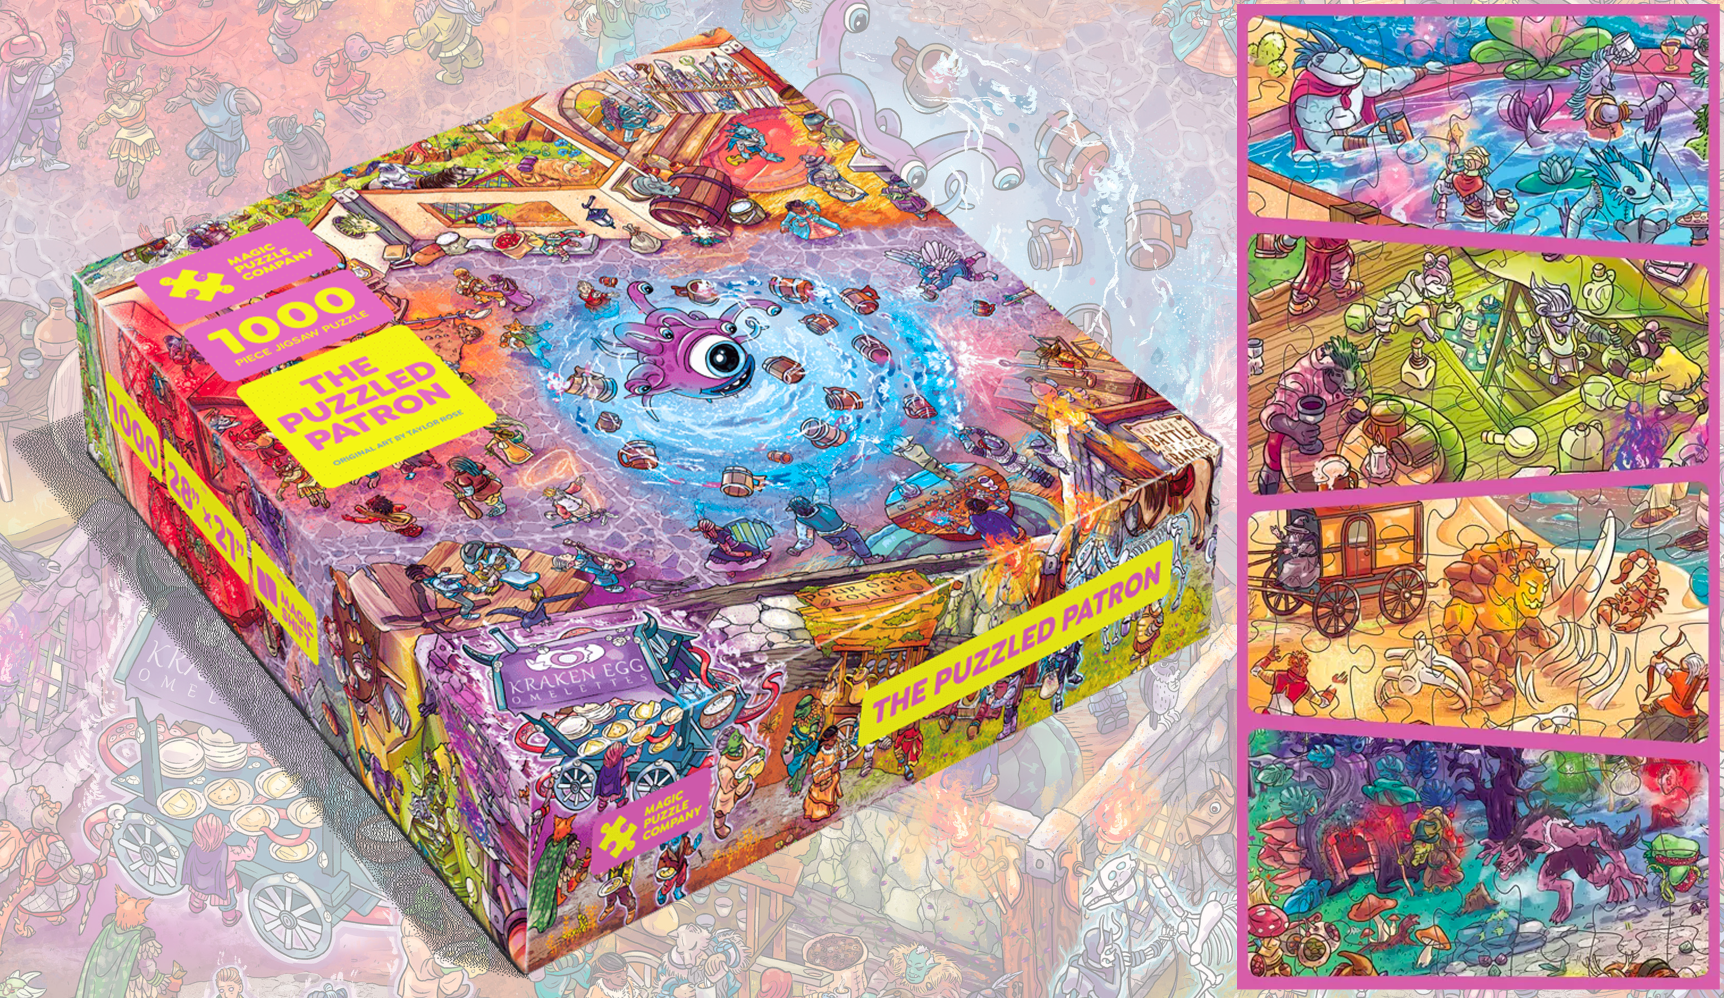  The Puzzled Patron • 1000-Piece Jigsaw Puzzle from The